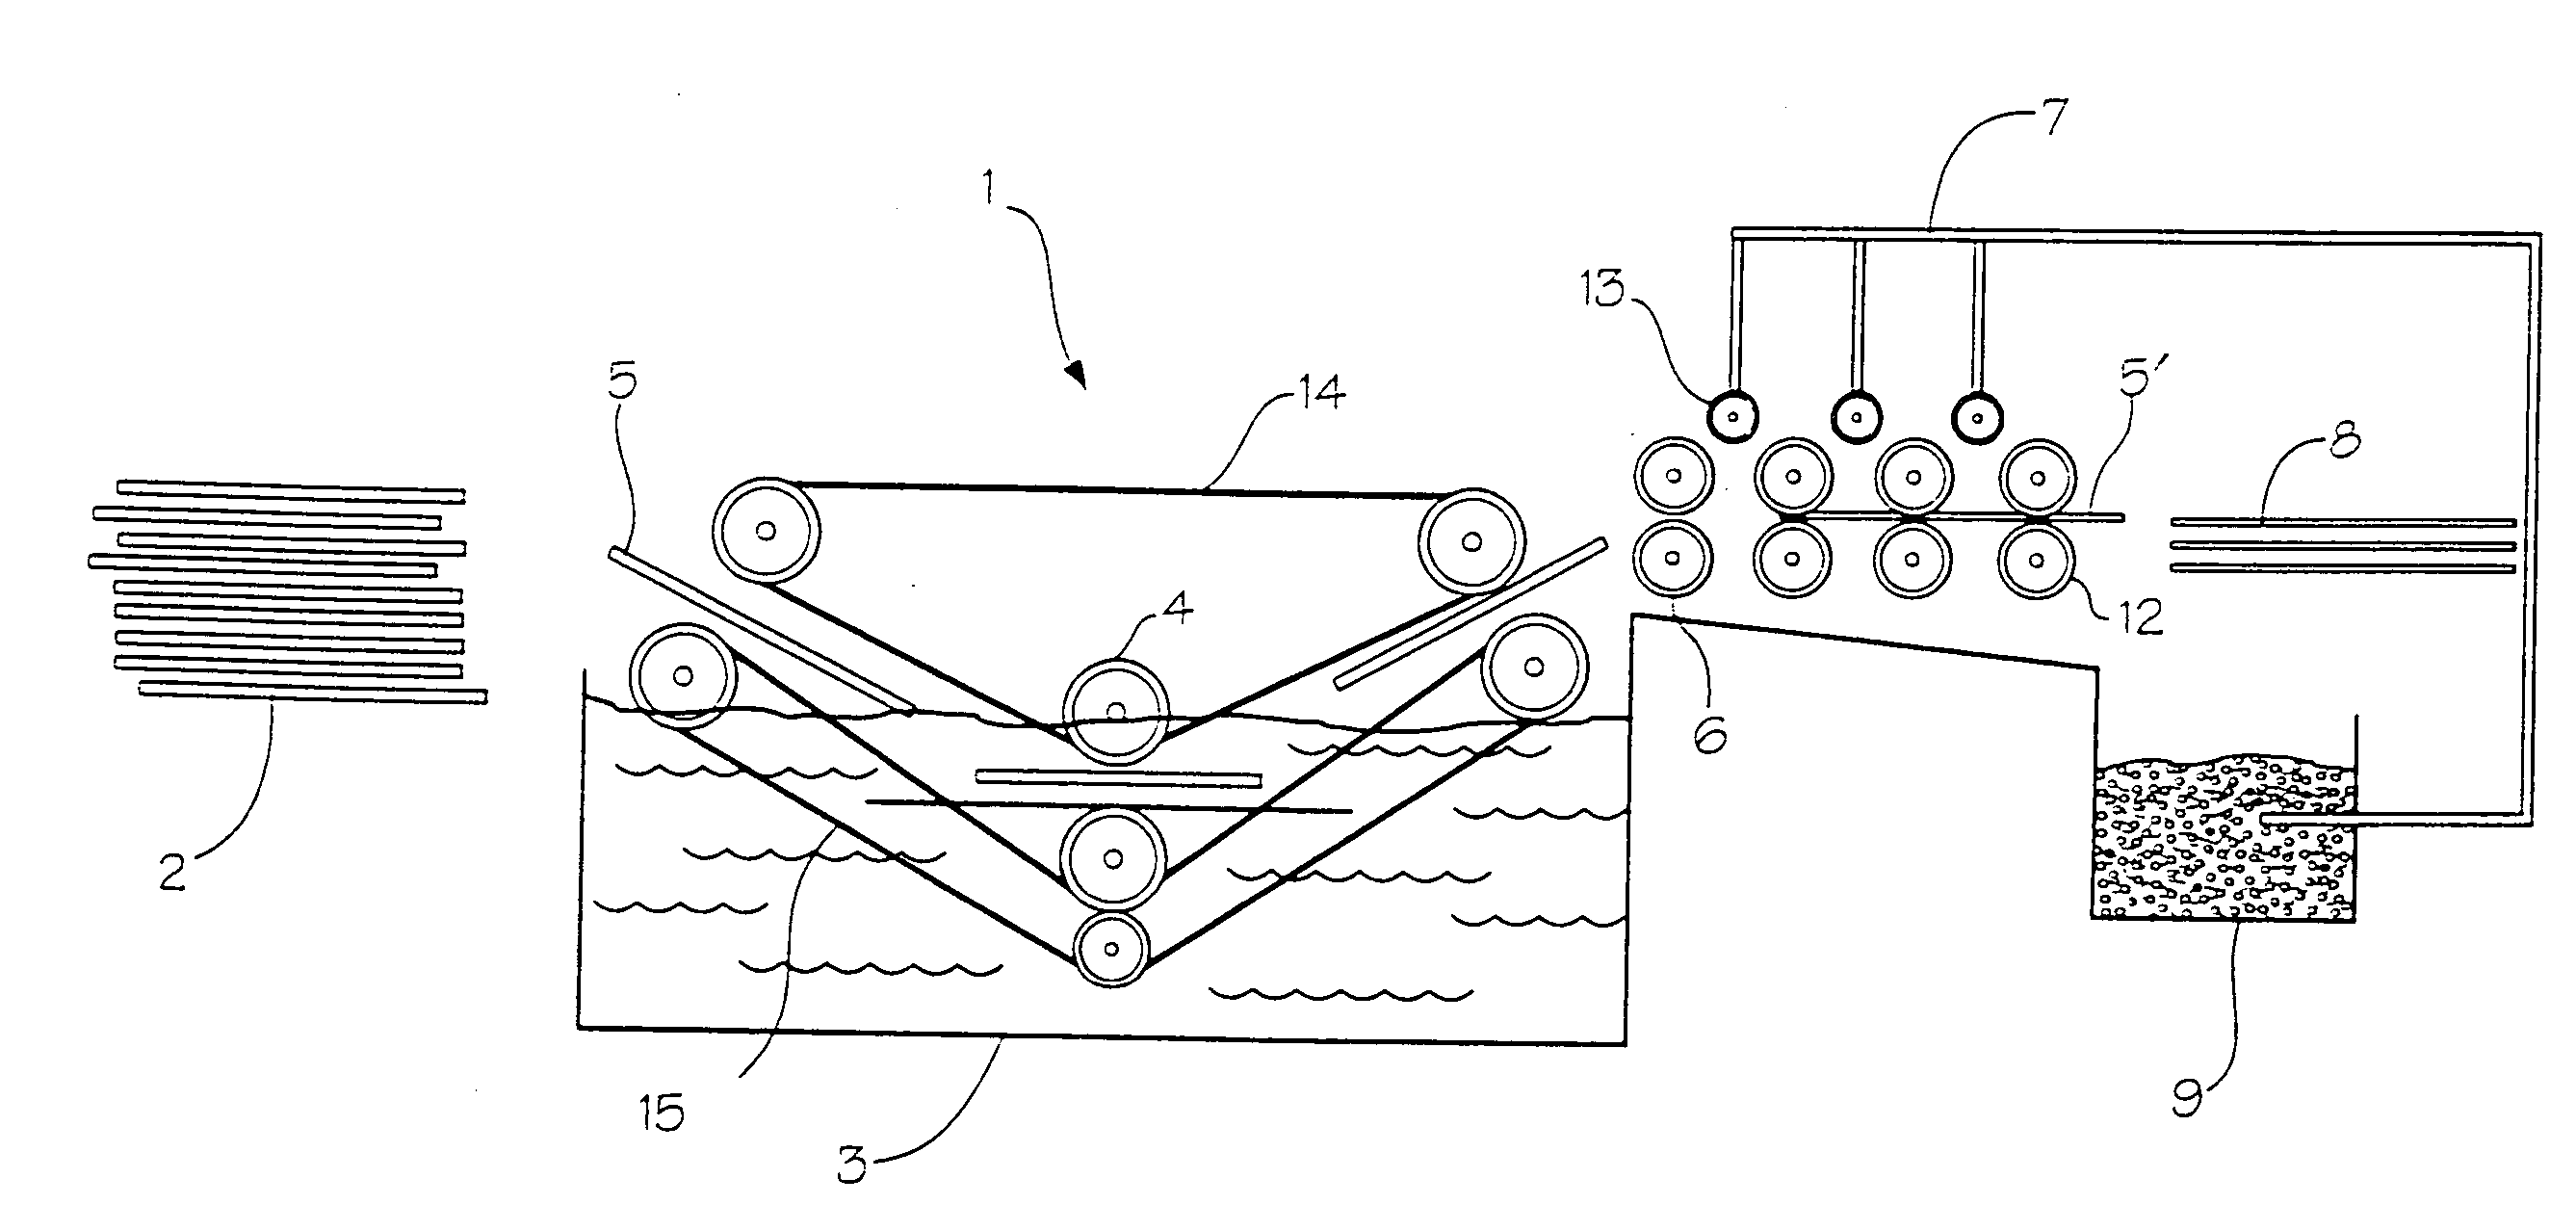 Moisture resistant, repulpable paper products and method of making same